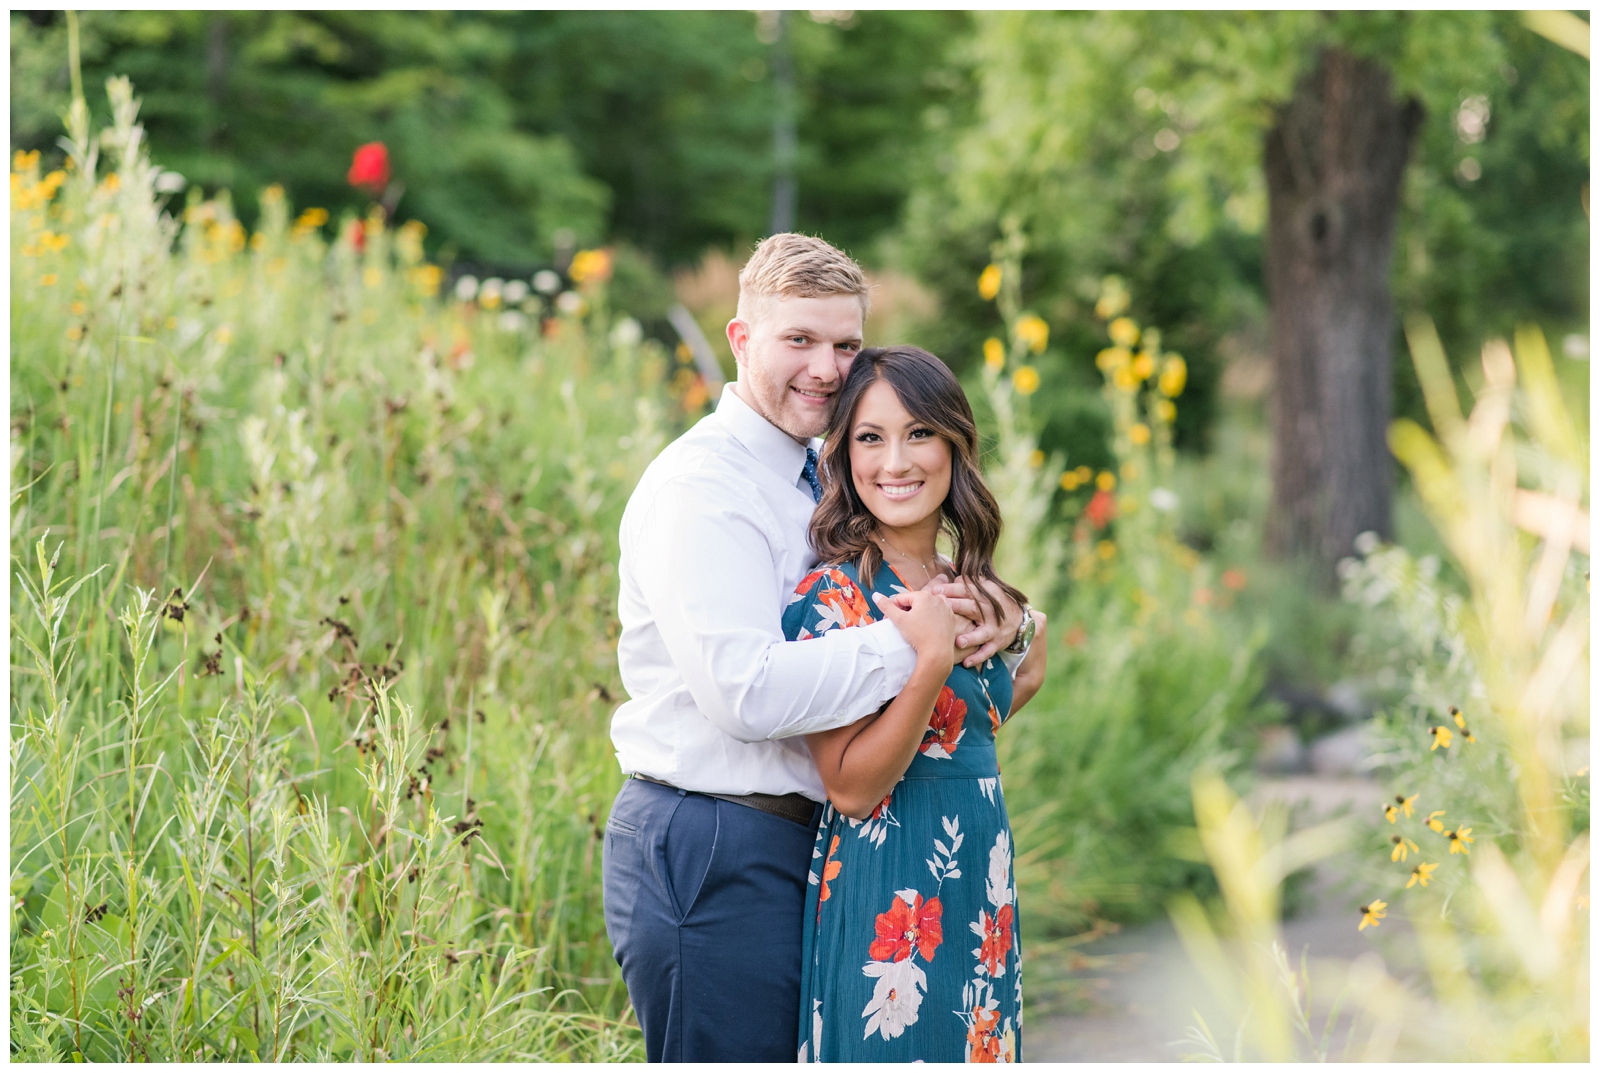 engaged couple smiling at the camera in the center of the image with garden greens surrounding them 